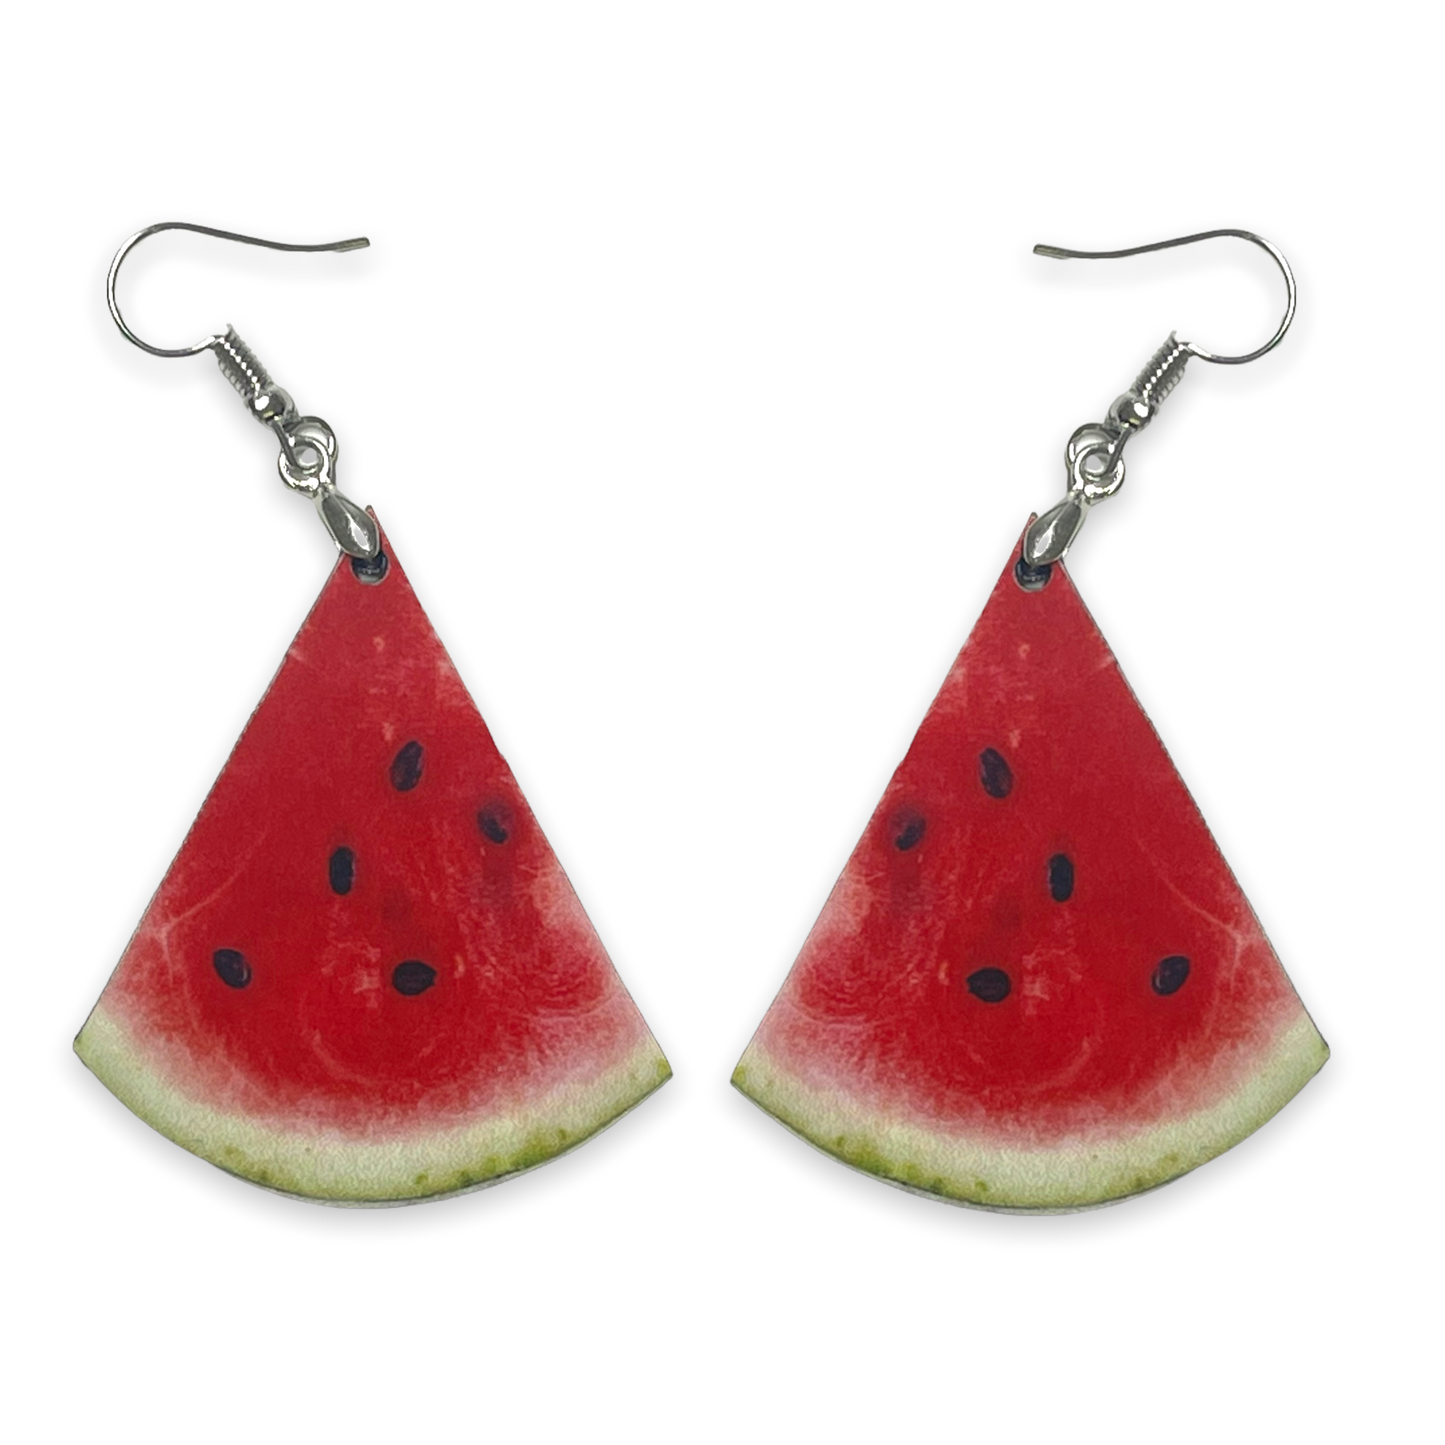 Watermelon Slice Shaped Earring Sublimation Blanks